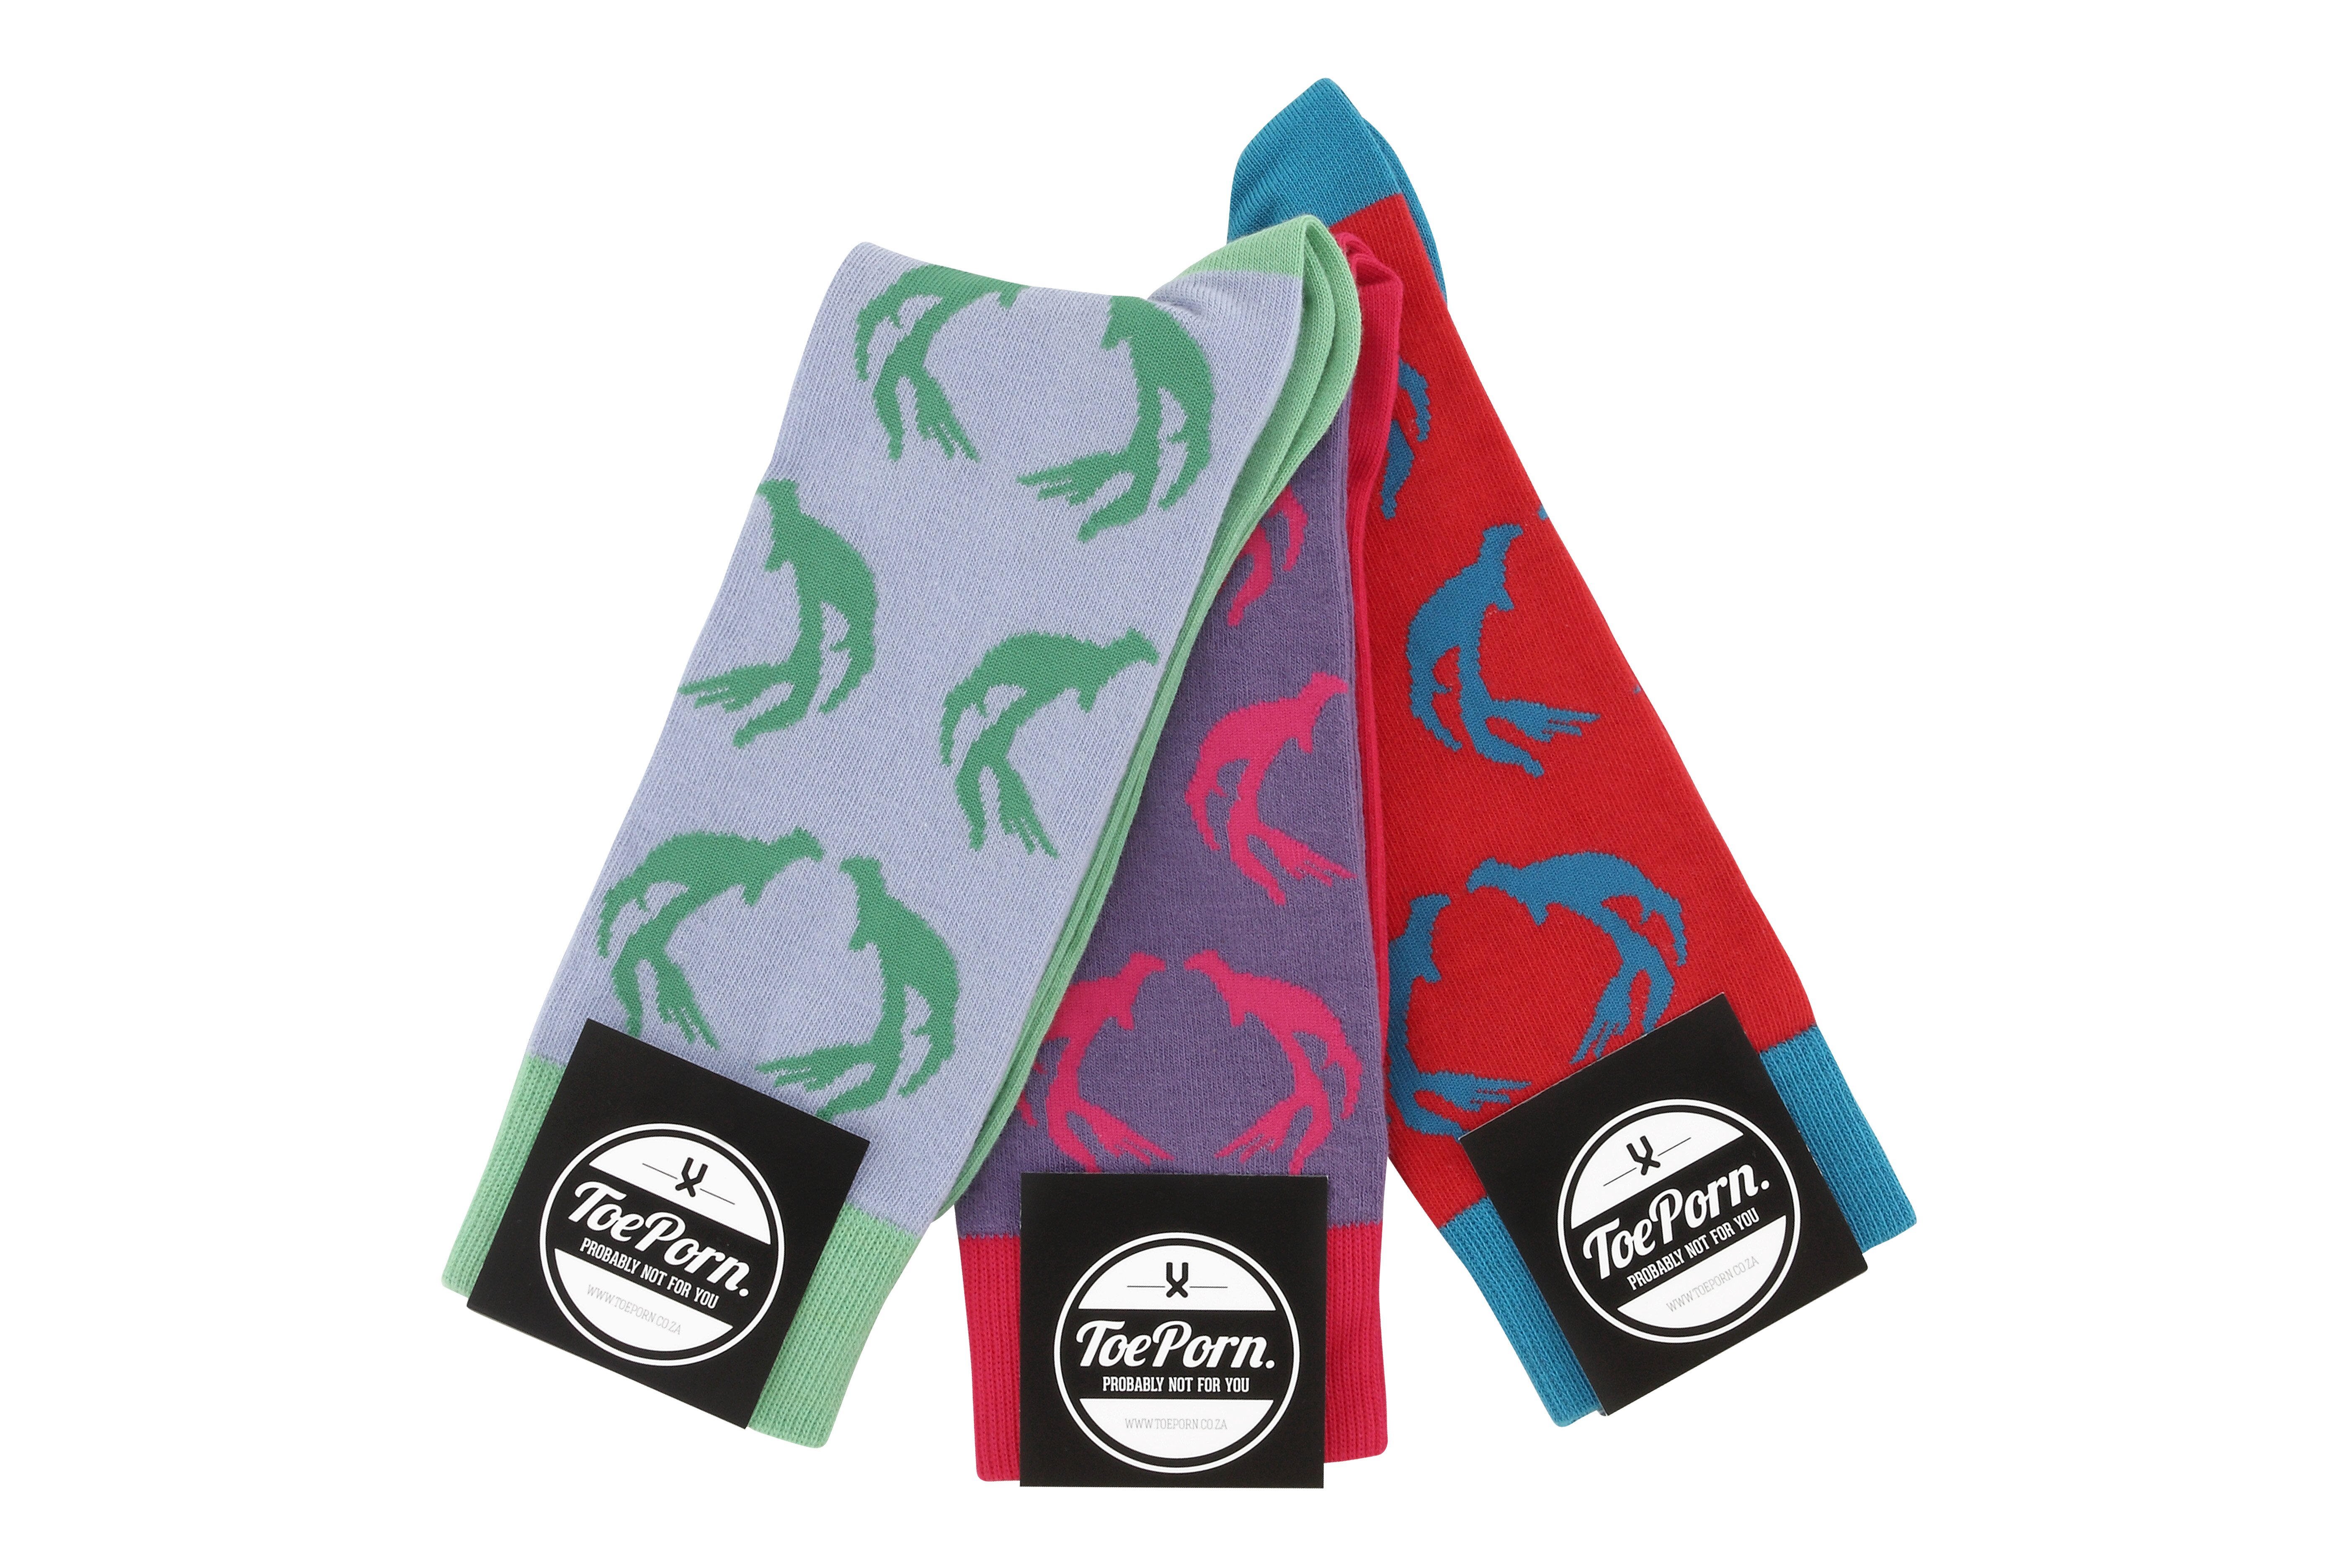 Savannah Horn ToePorn socks available in Dust Blue, Purple and Red, R90 each